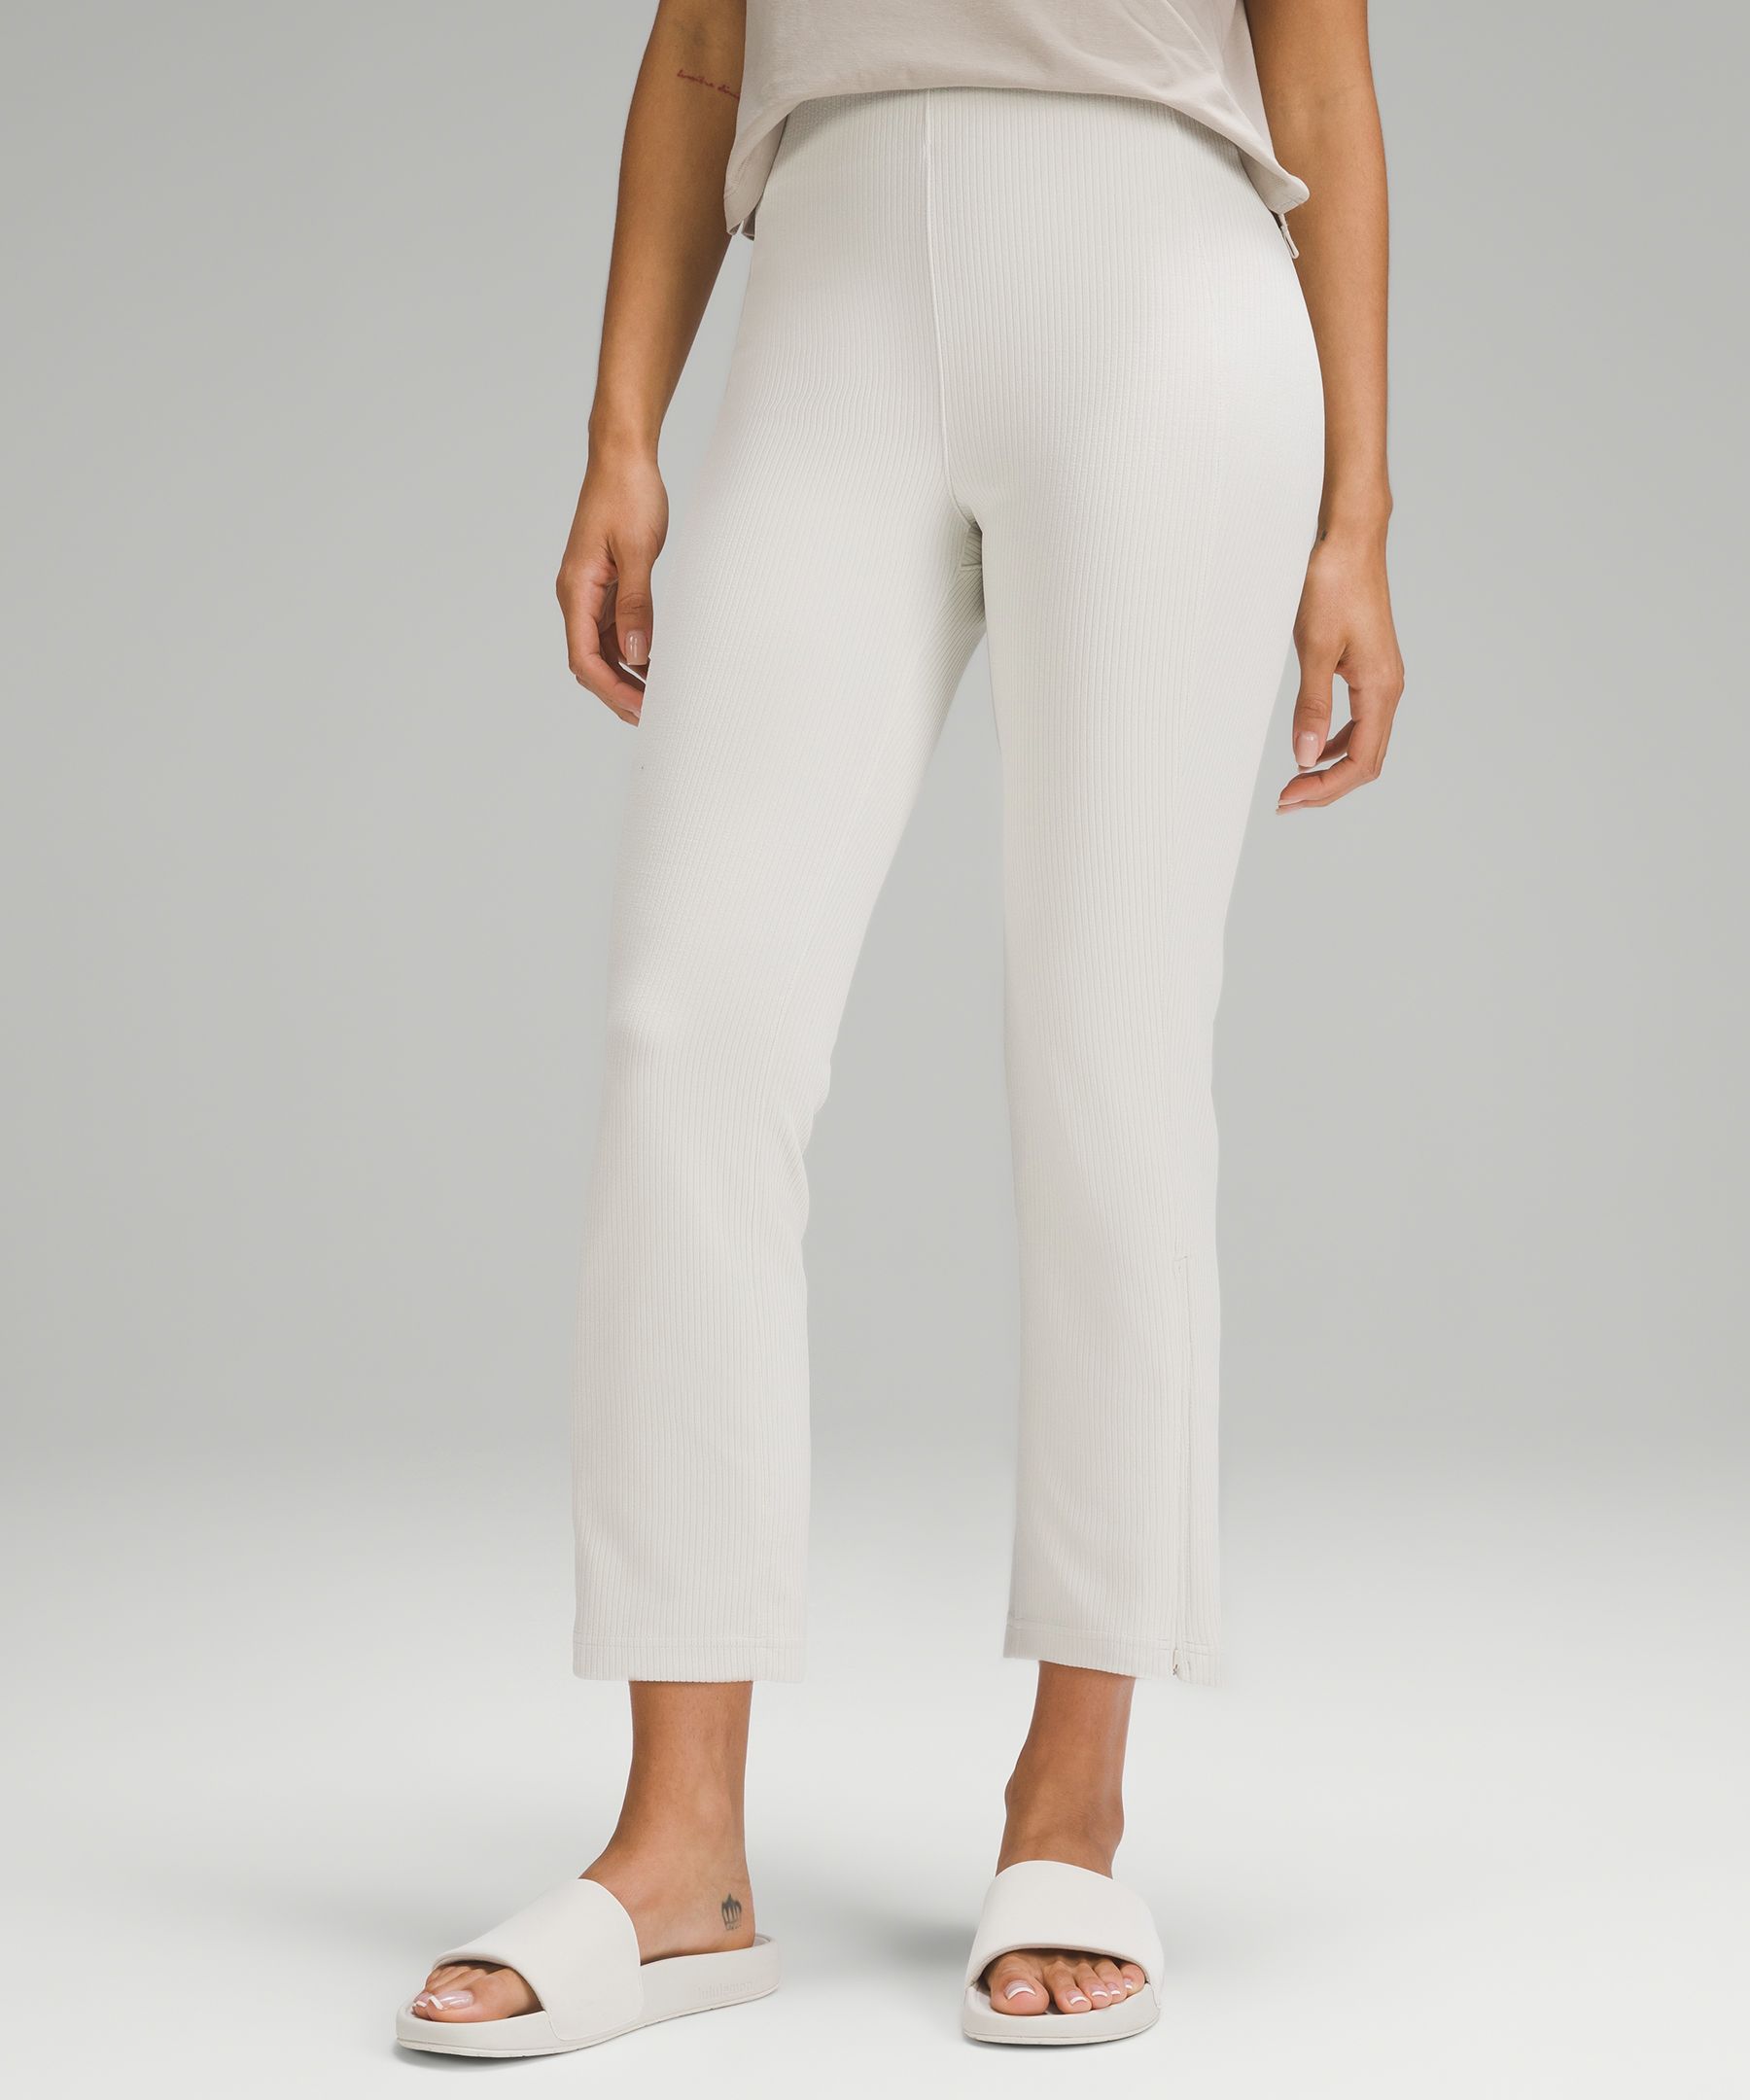 Lululemon Softstreme Relaxed High-Rise Pant. Never